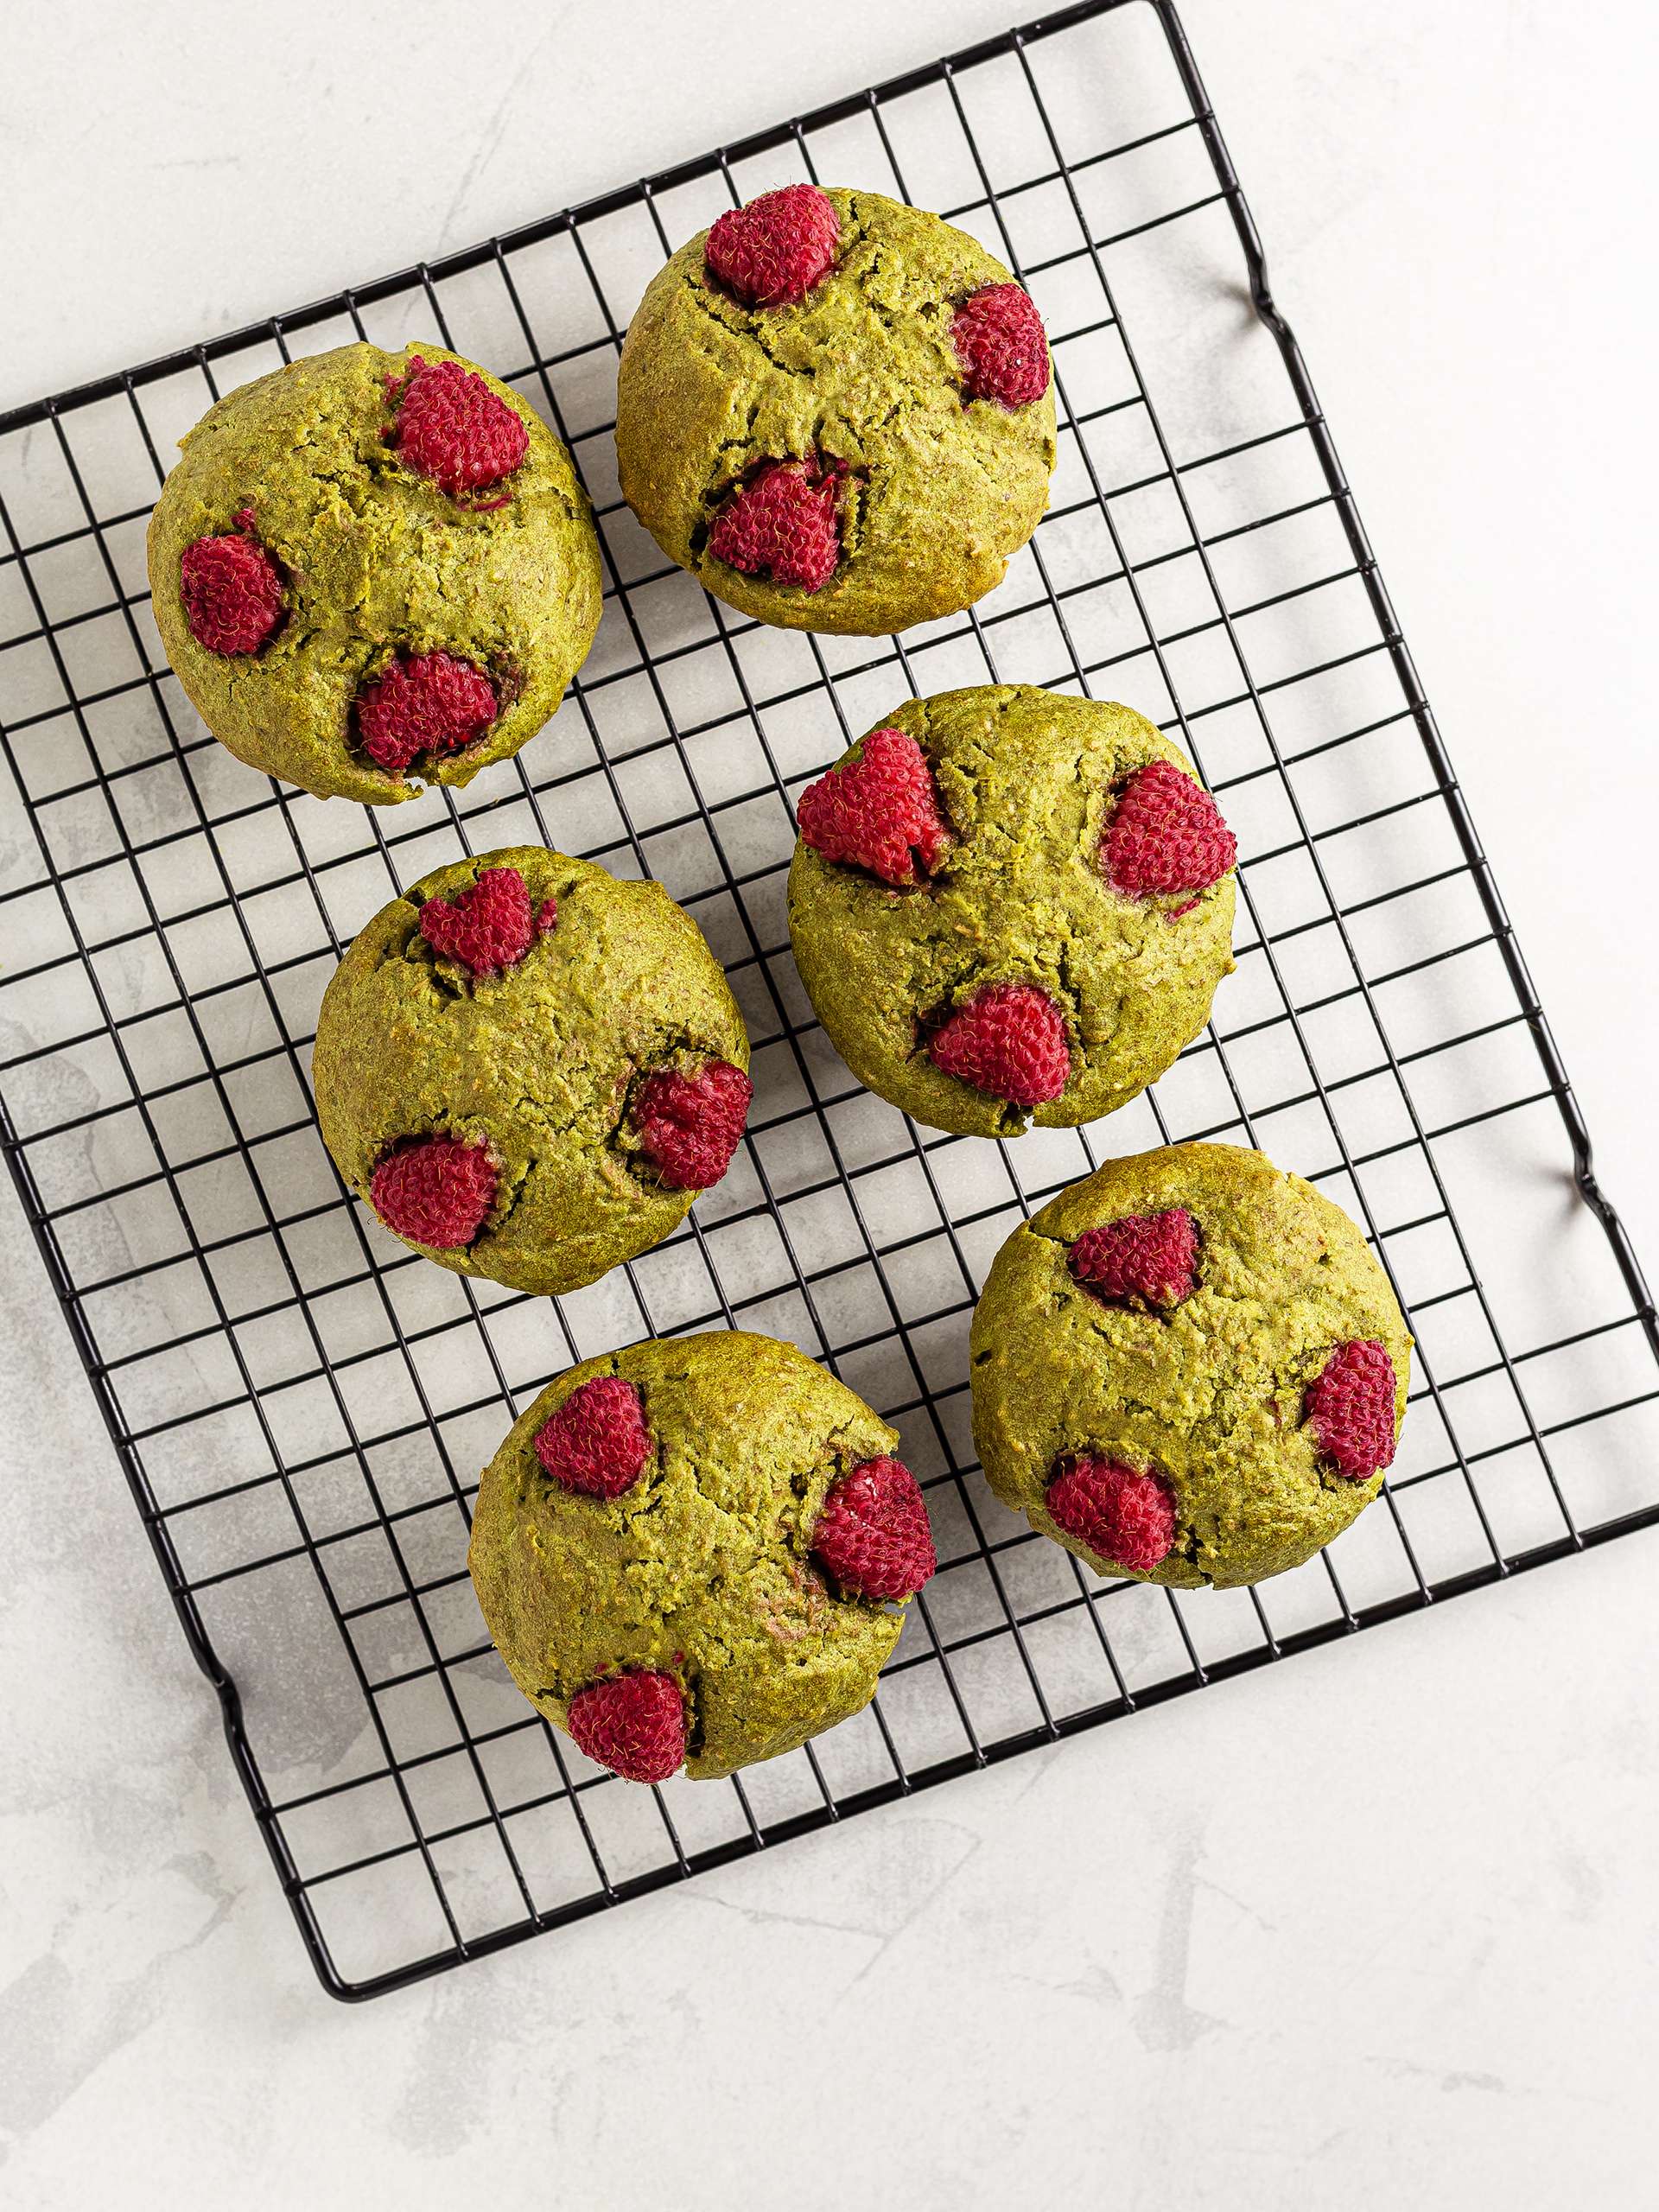 baked vegan matcha muffins on a wire rack